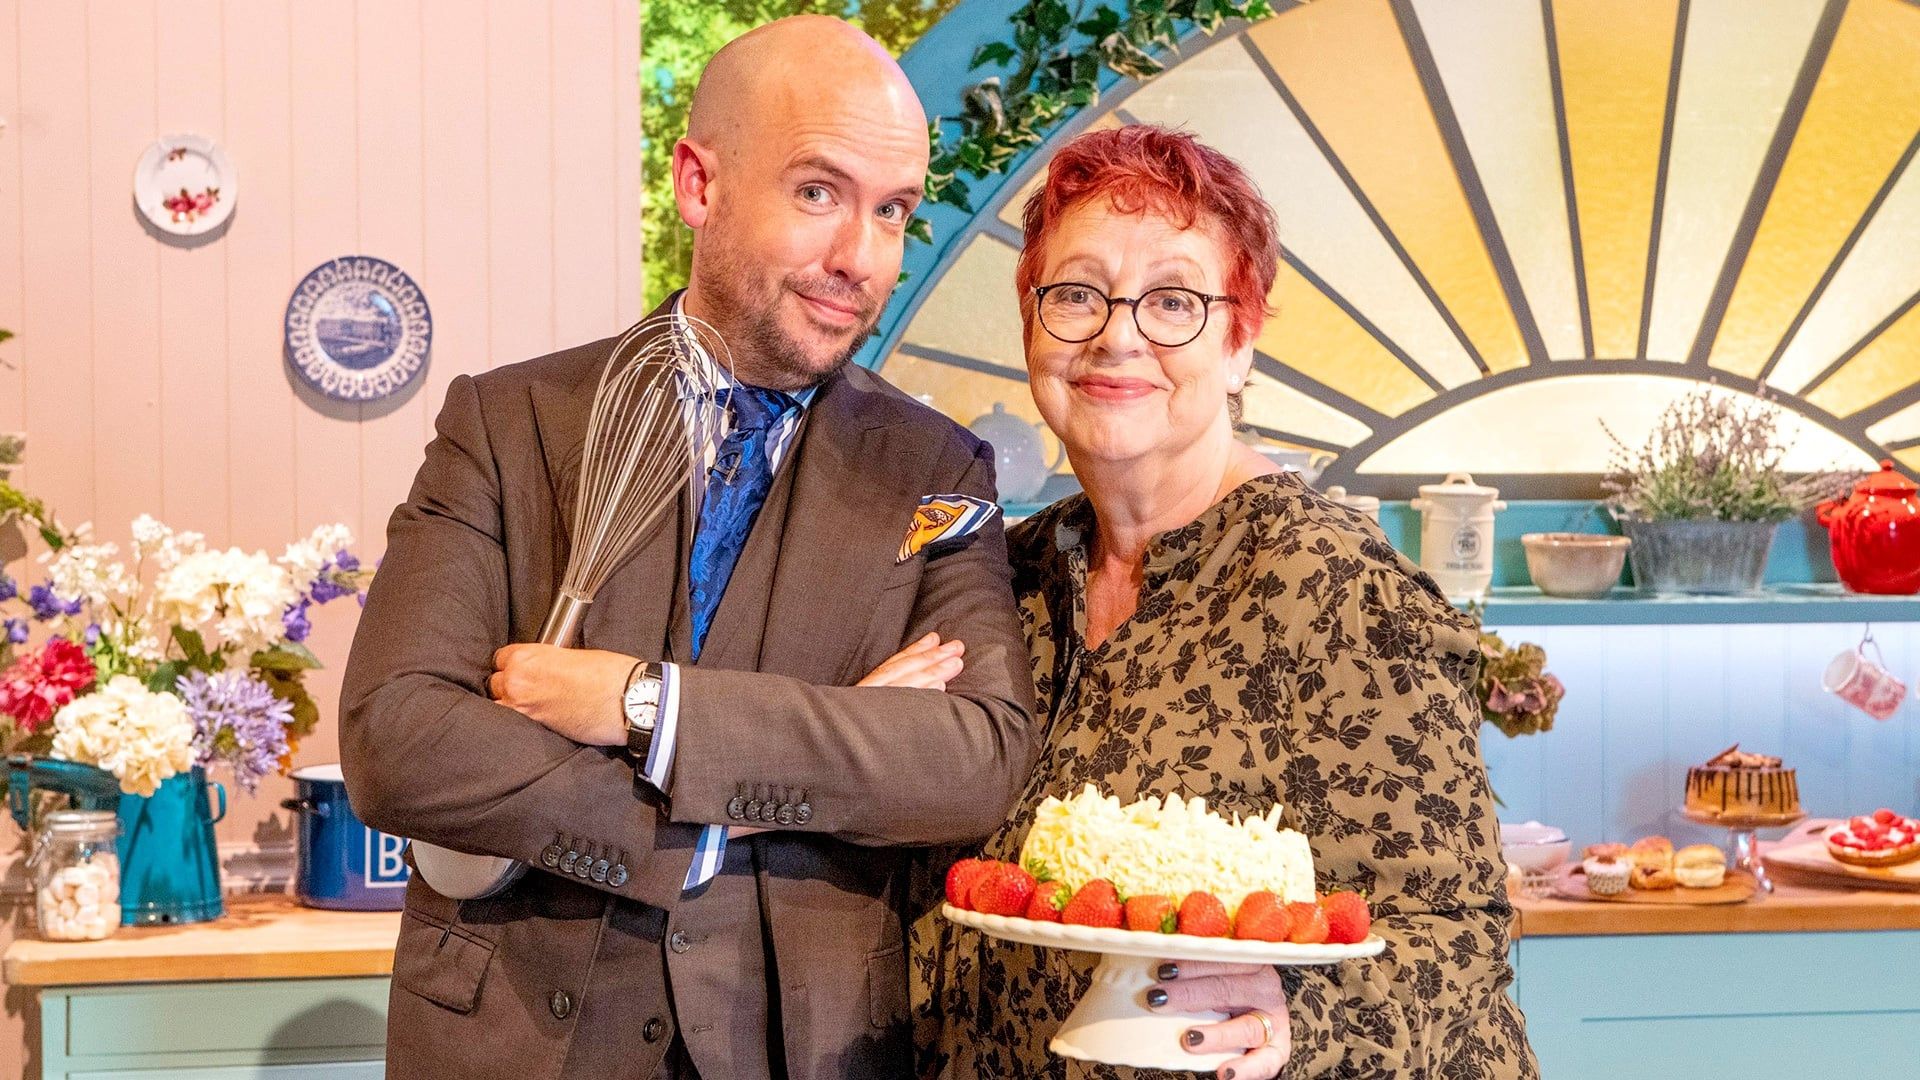 The Great British Bake Off: An Extra Slice background